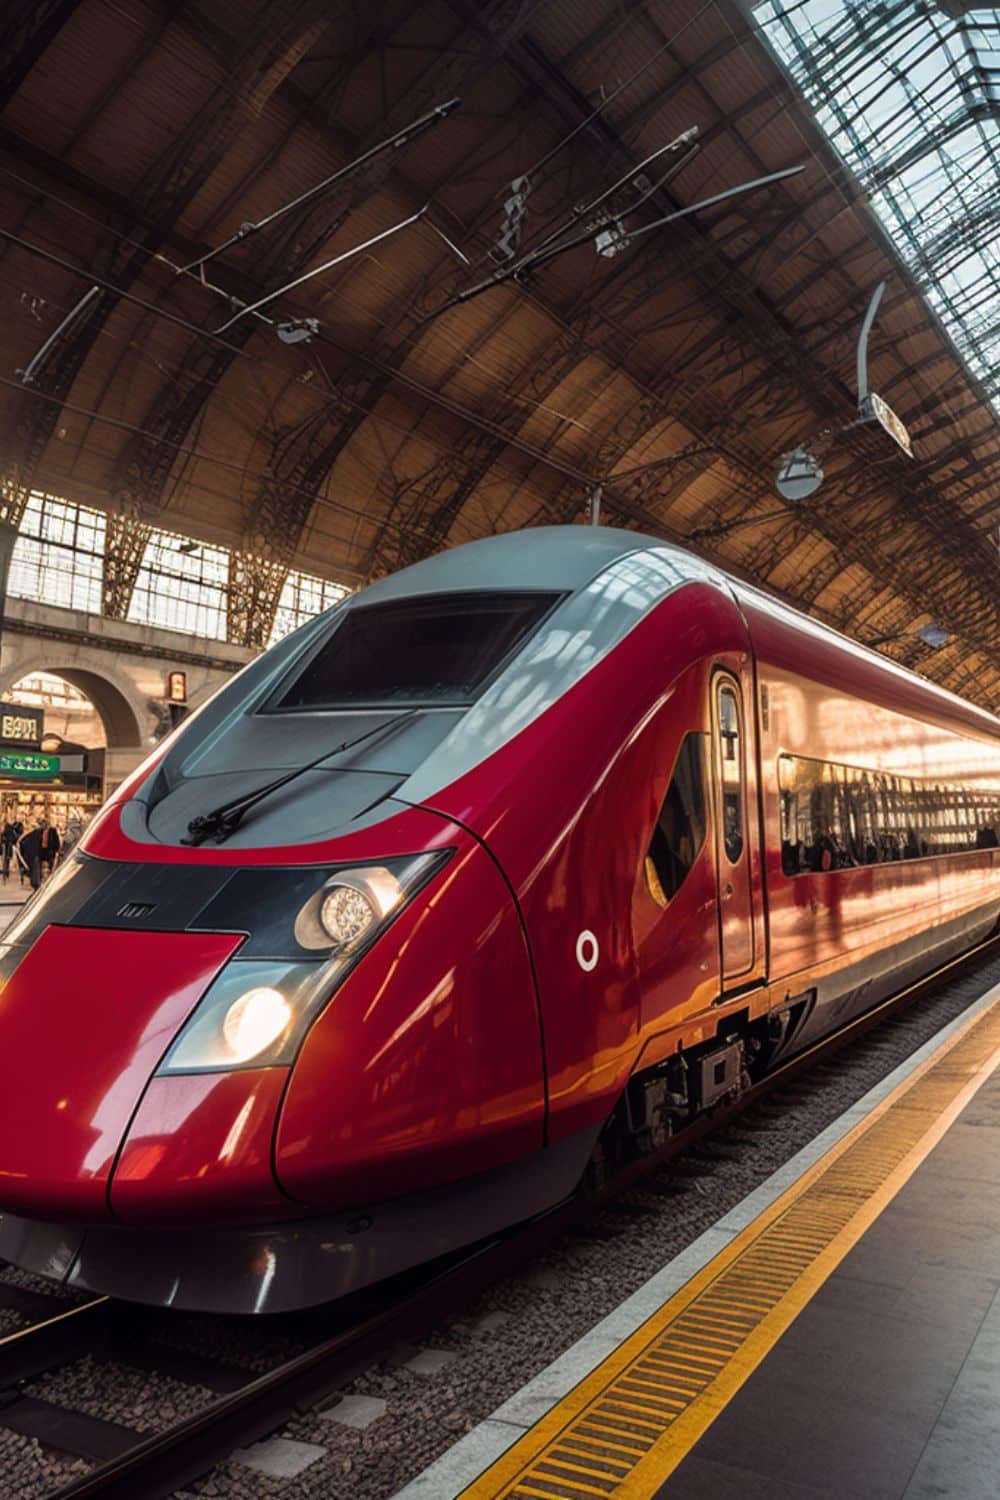 A sleek modern high speed train parked at an Italian train station ready to whisk passengers to their next destination for train travel in Italy 